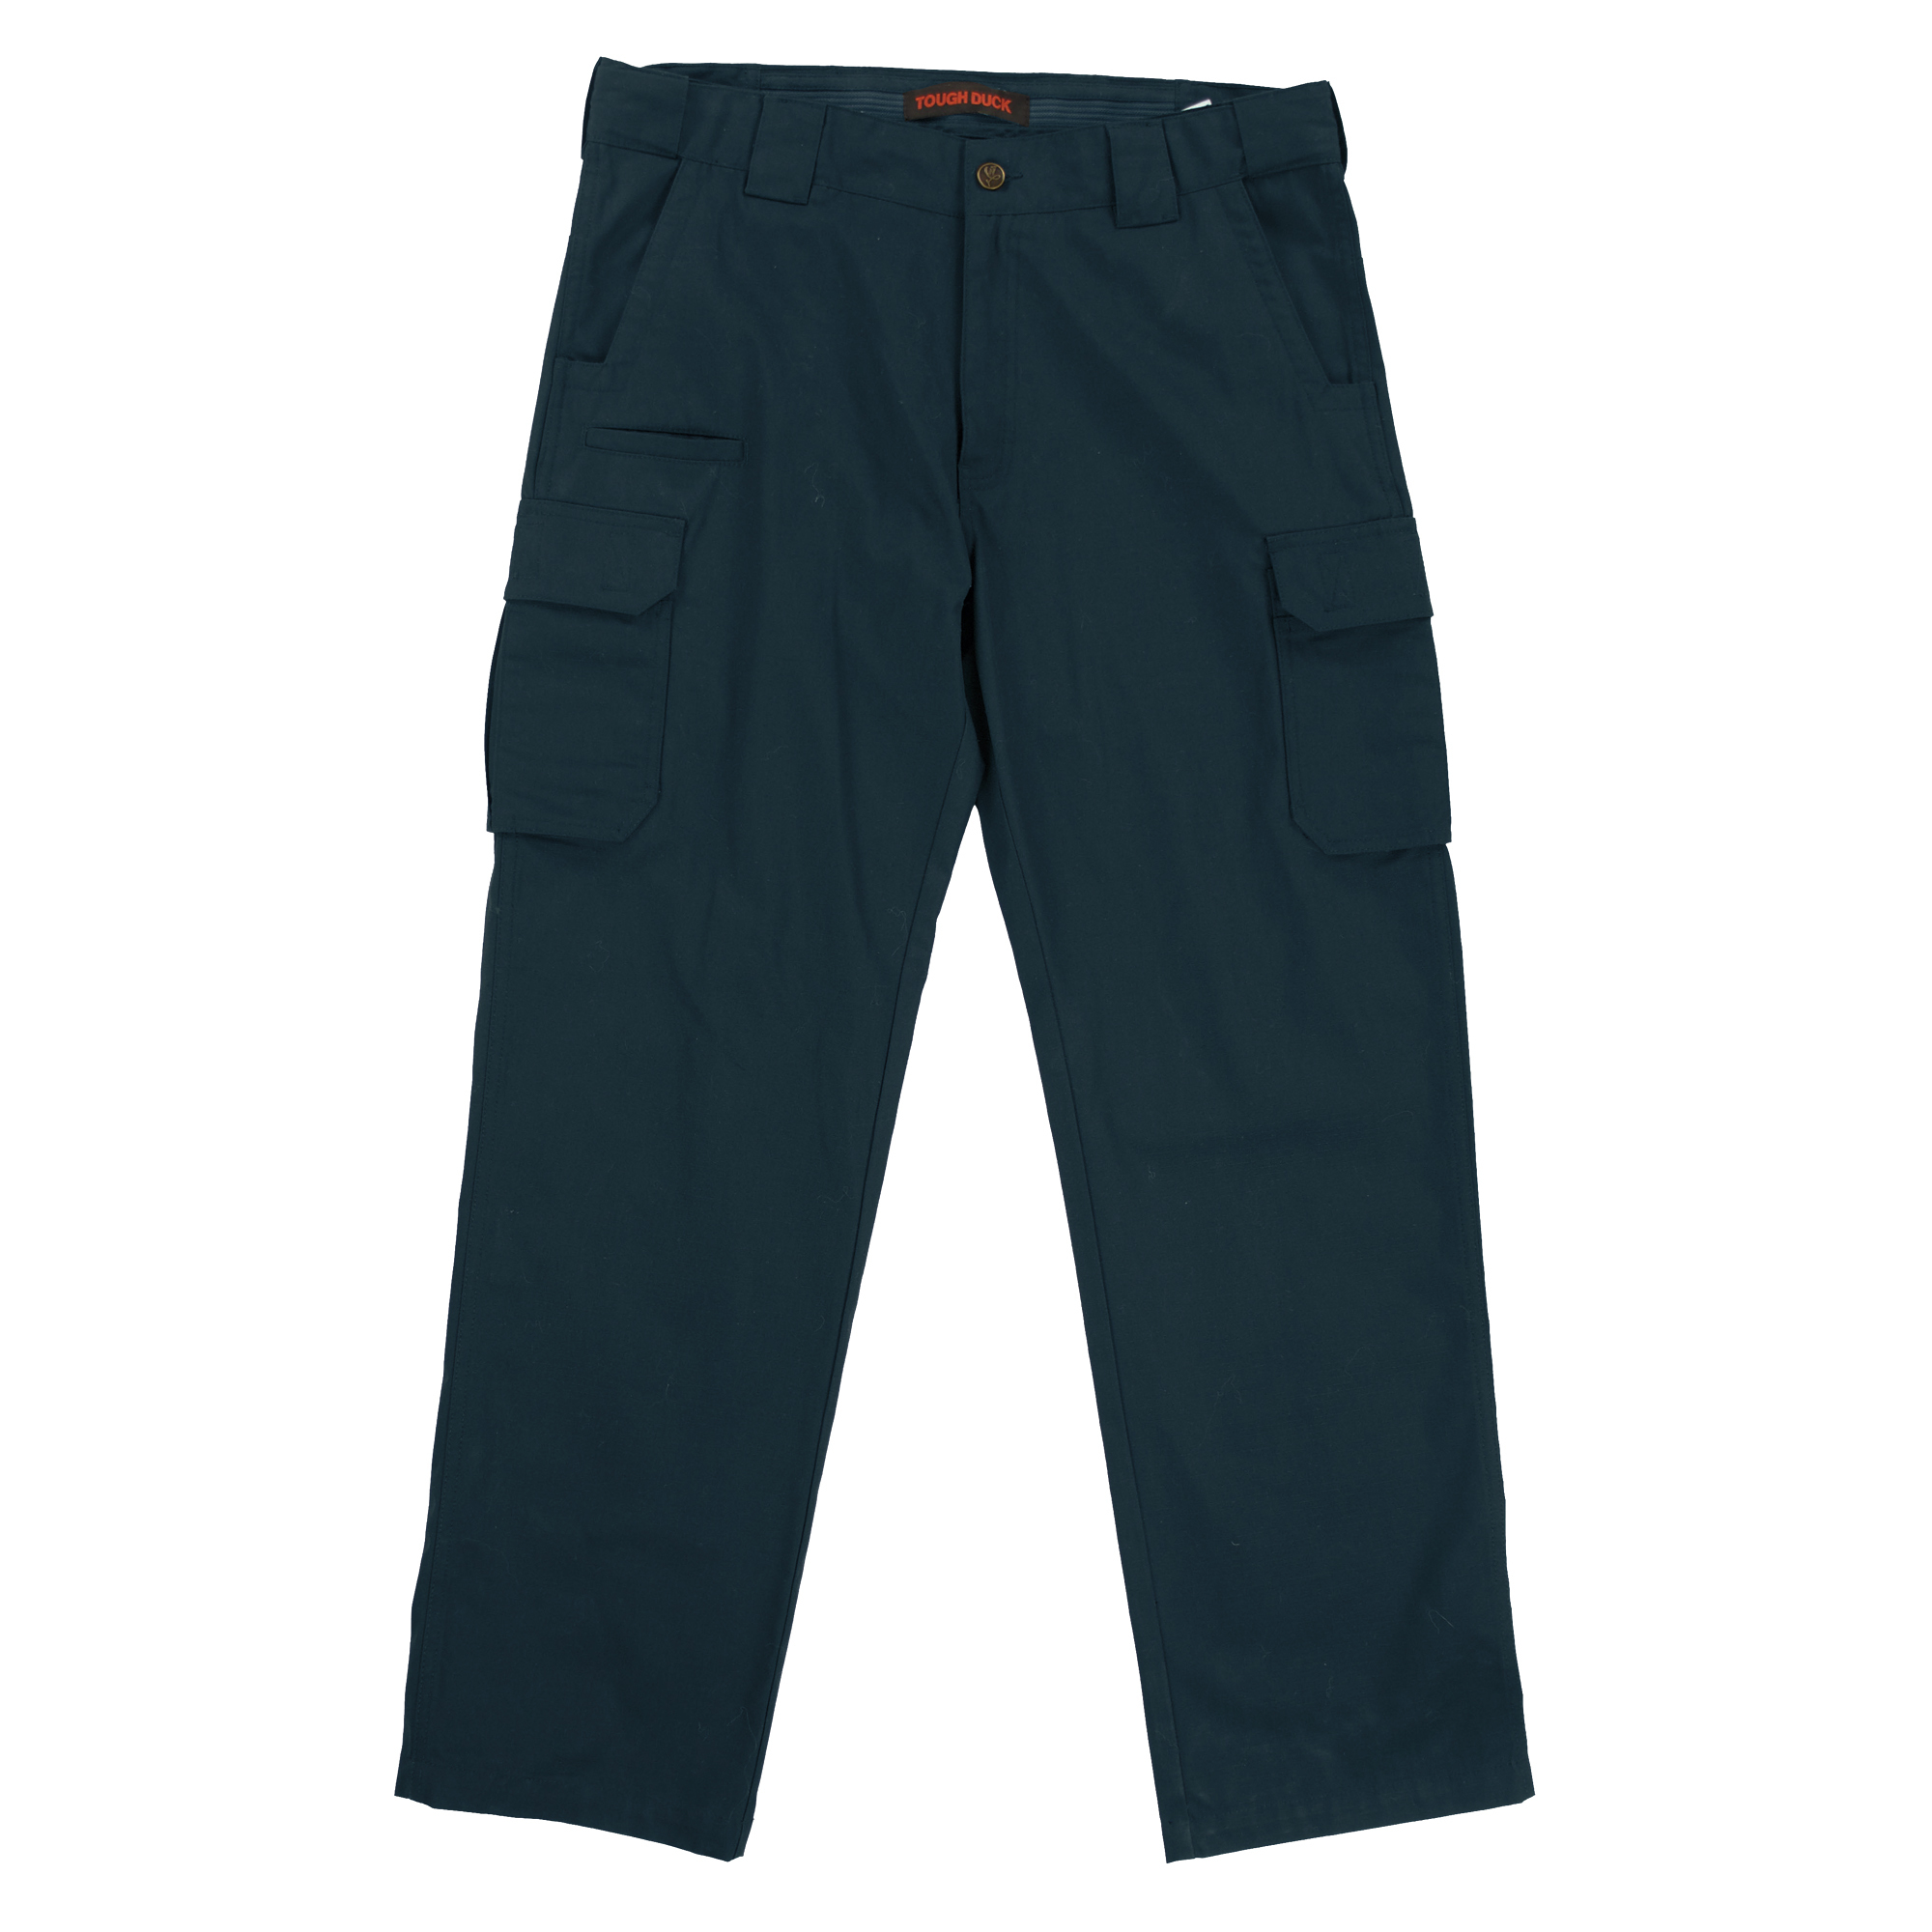 Tough Duck, Ripstop Cargo Pant, Waist 40 in, Inseam 32 in, Color Navy, Model WP111